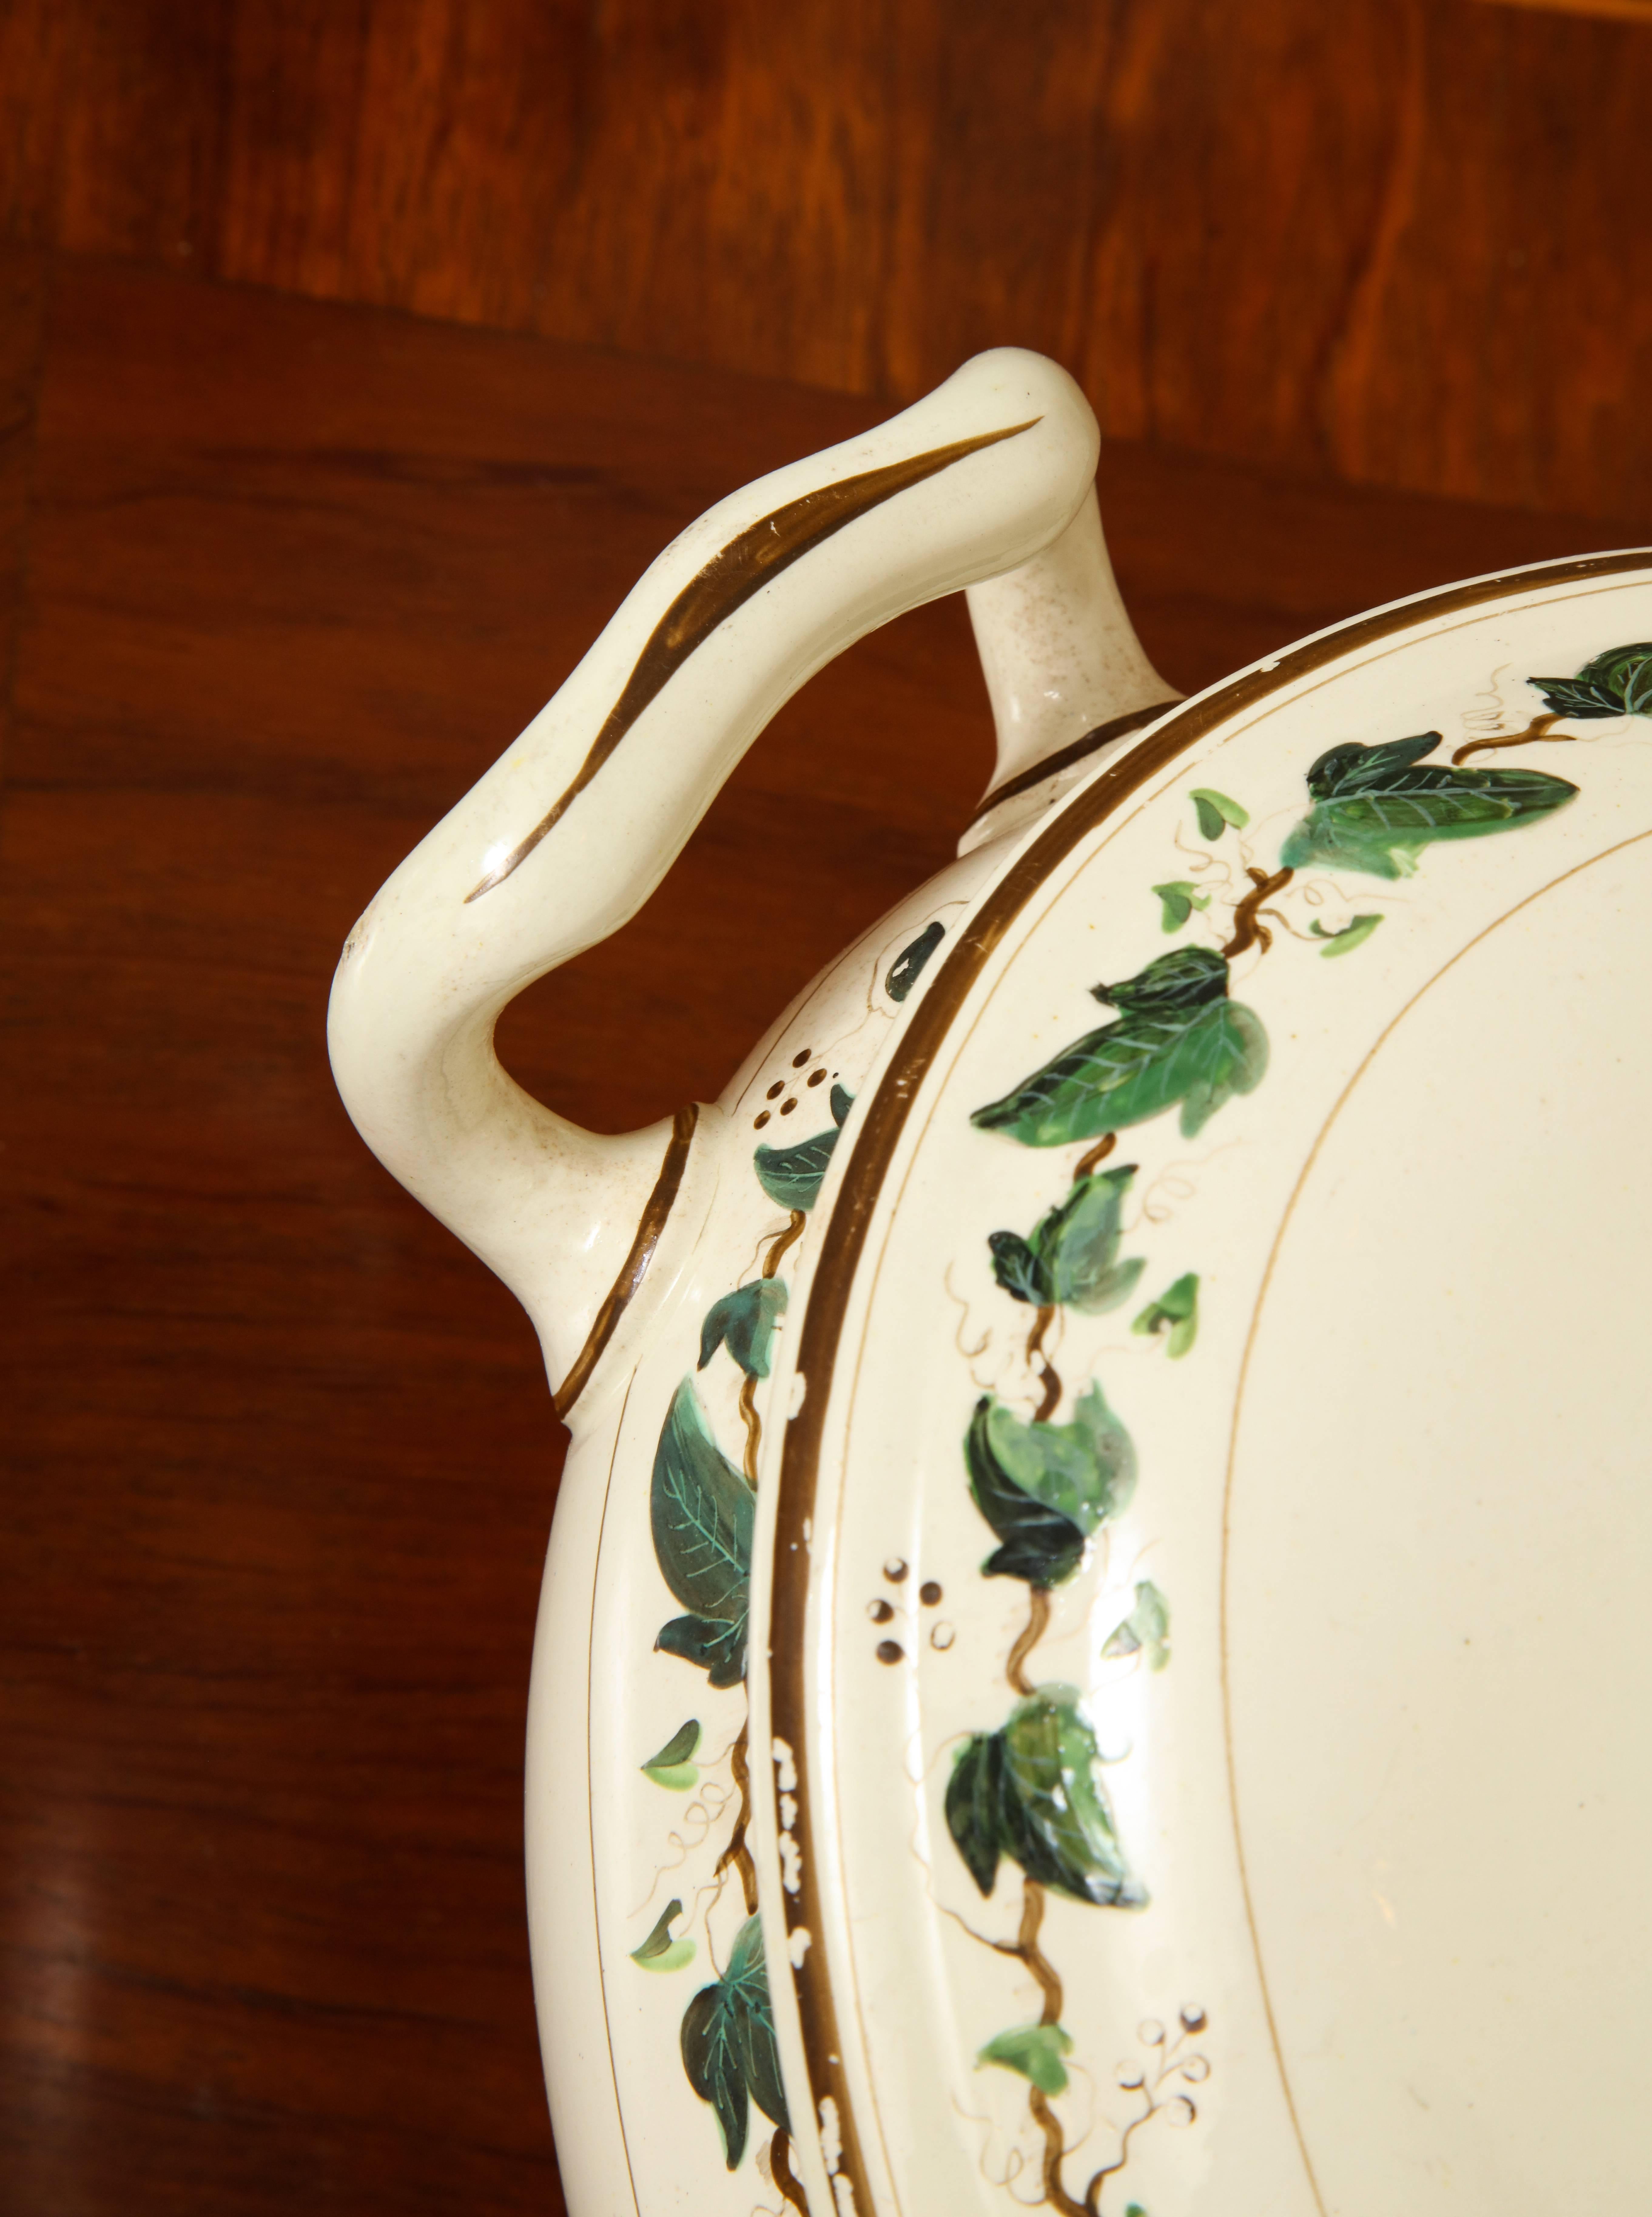 19th Century Wedgwood Creamware Covered Tureen with Ivy Decoration